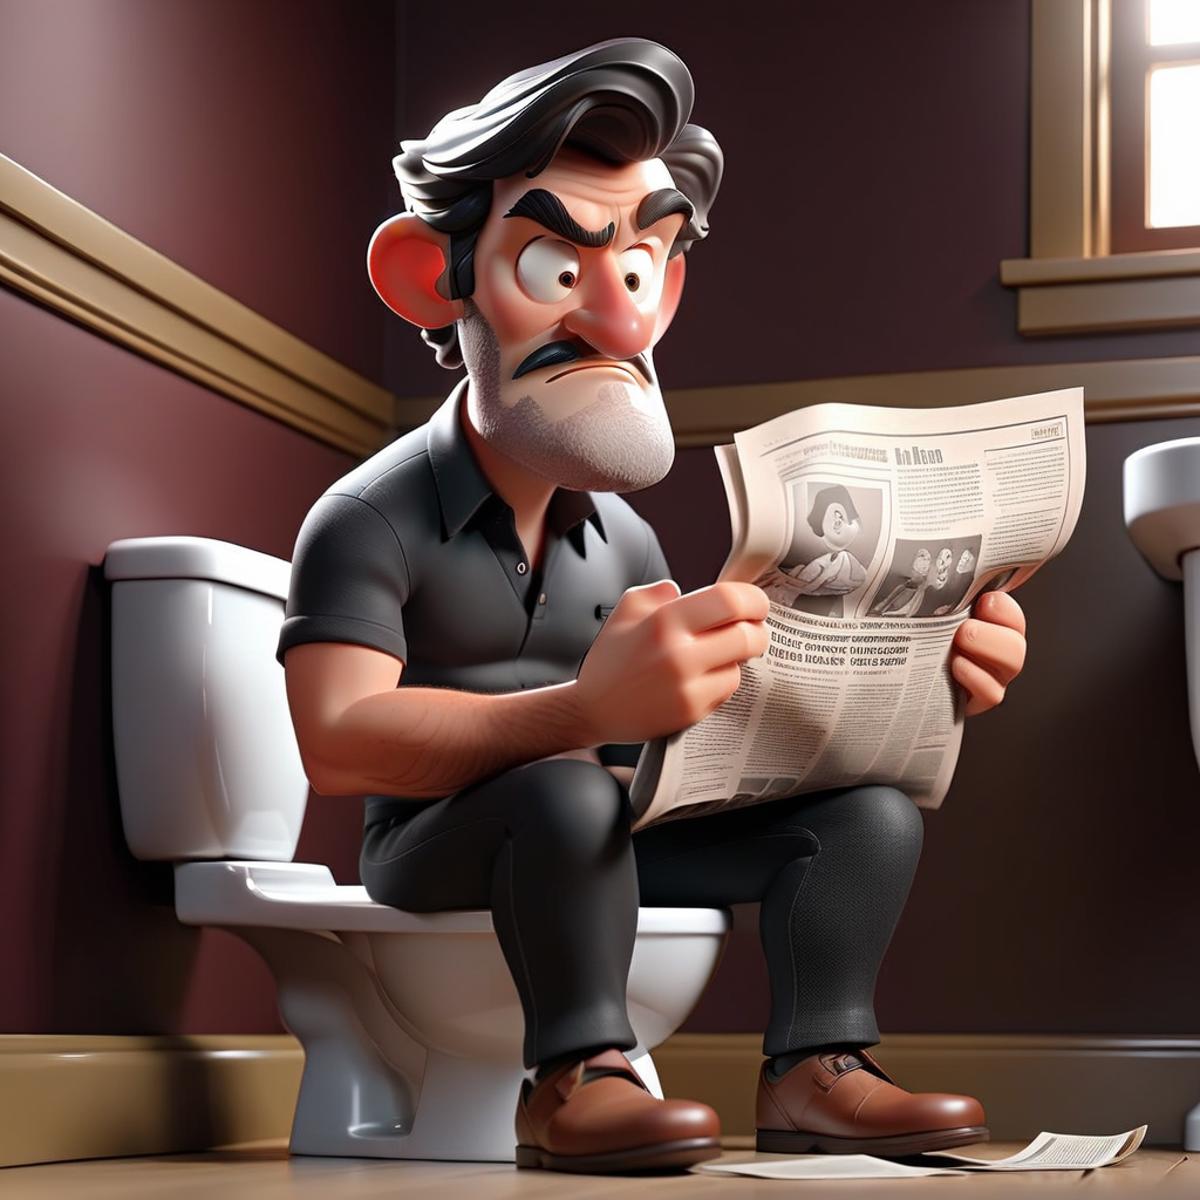 A man sitting on a toilet reading a newspaper.